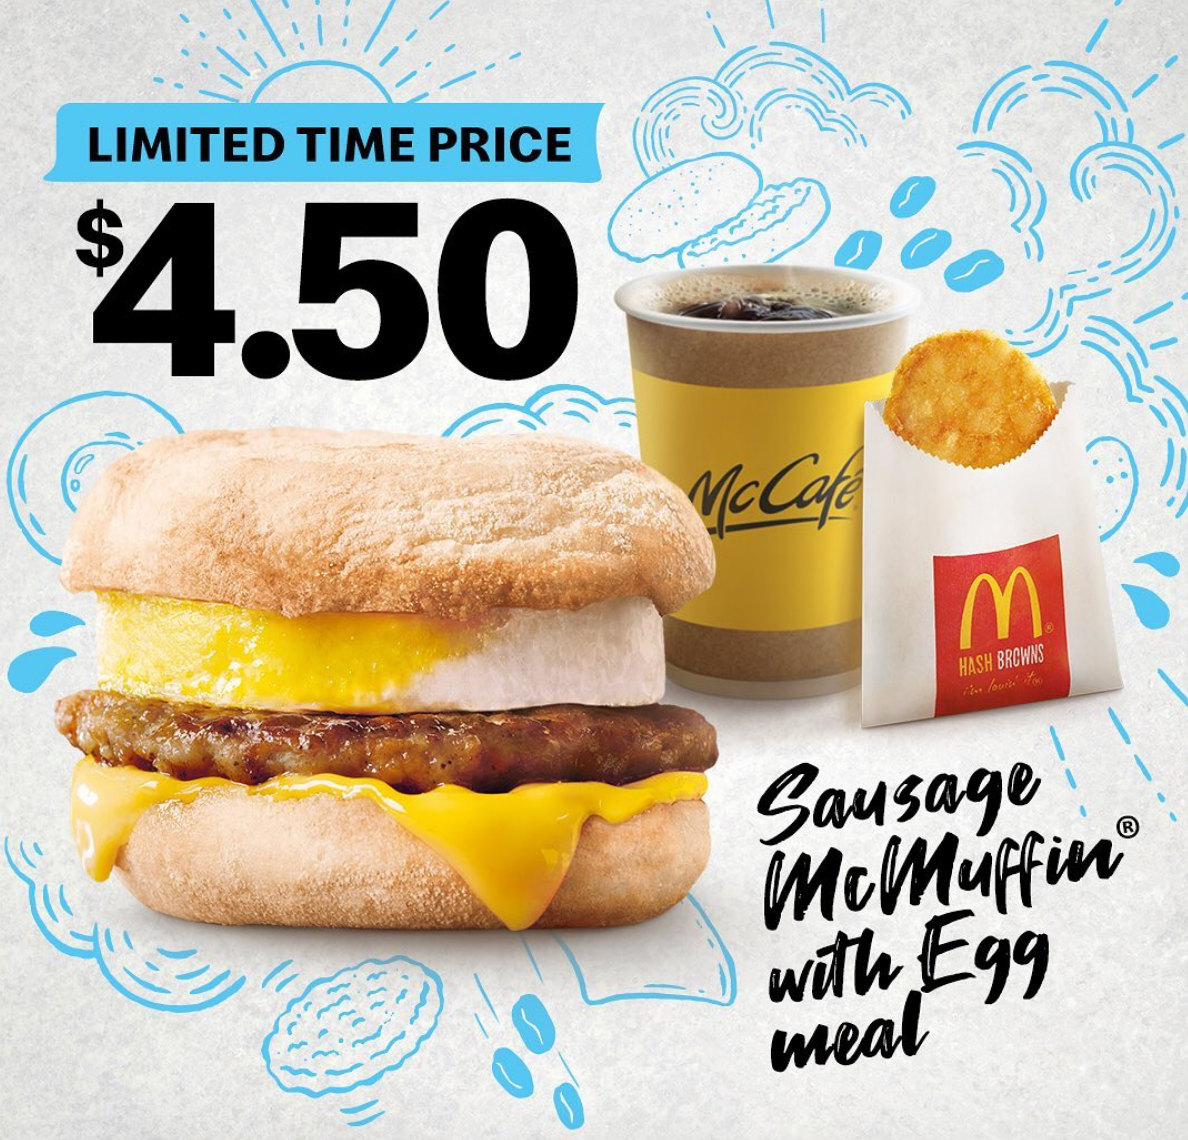 McDonald's sausage McMuffin with egg meal now at S4.50 only